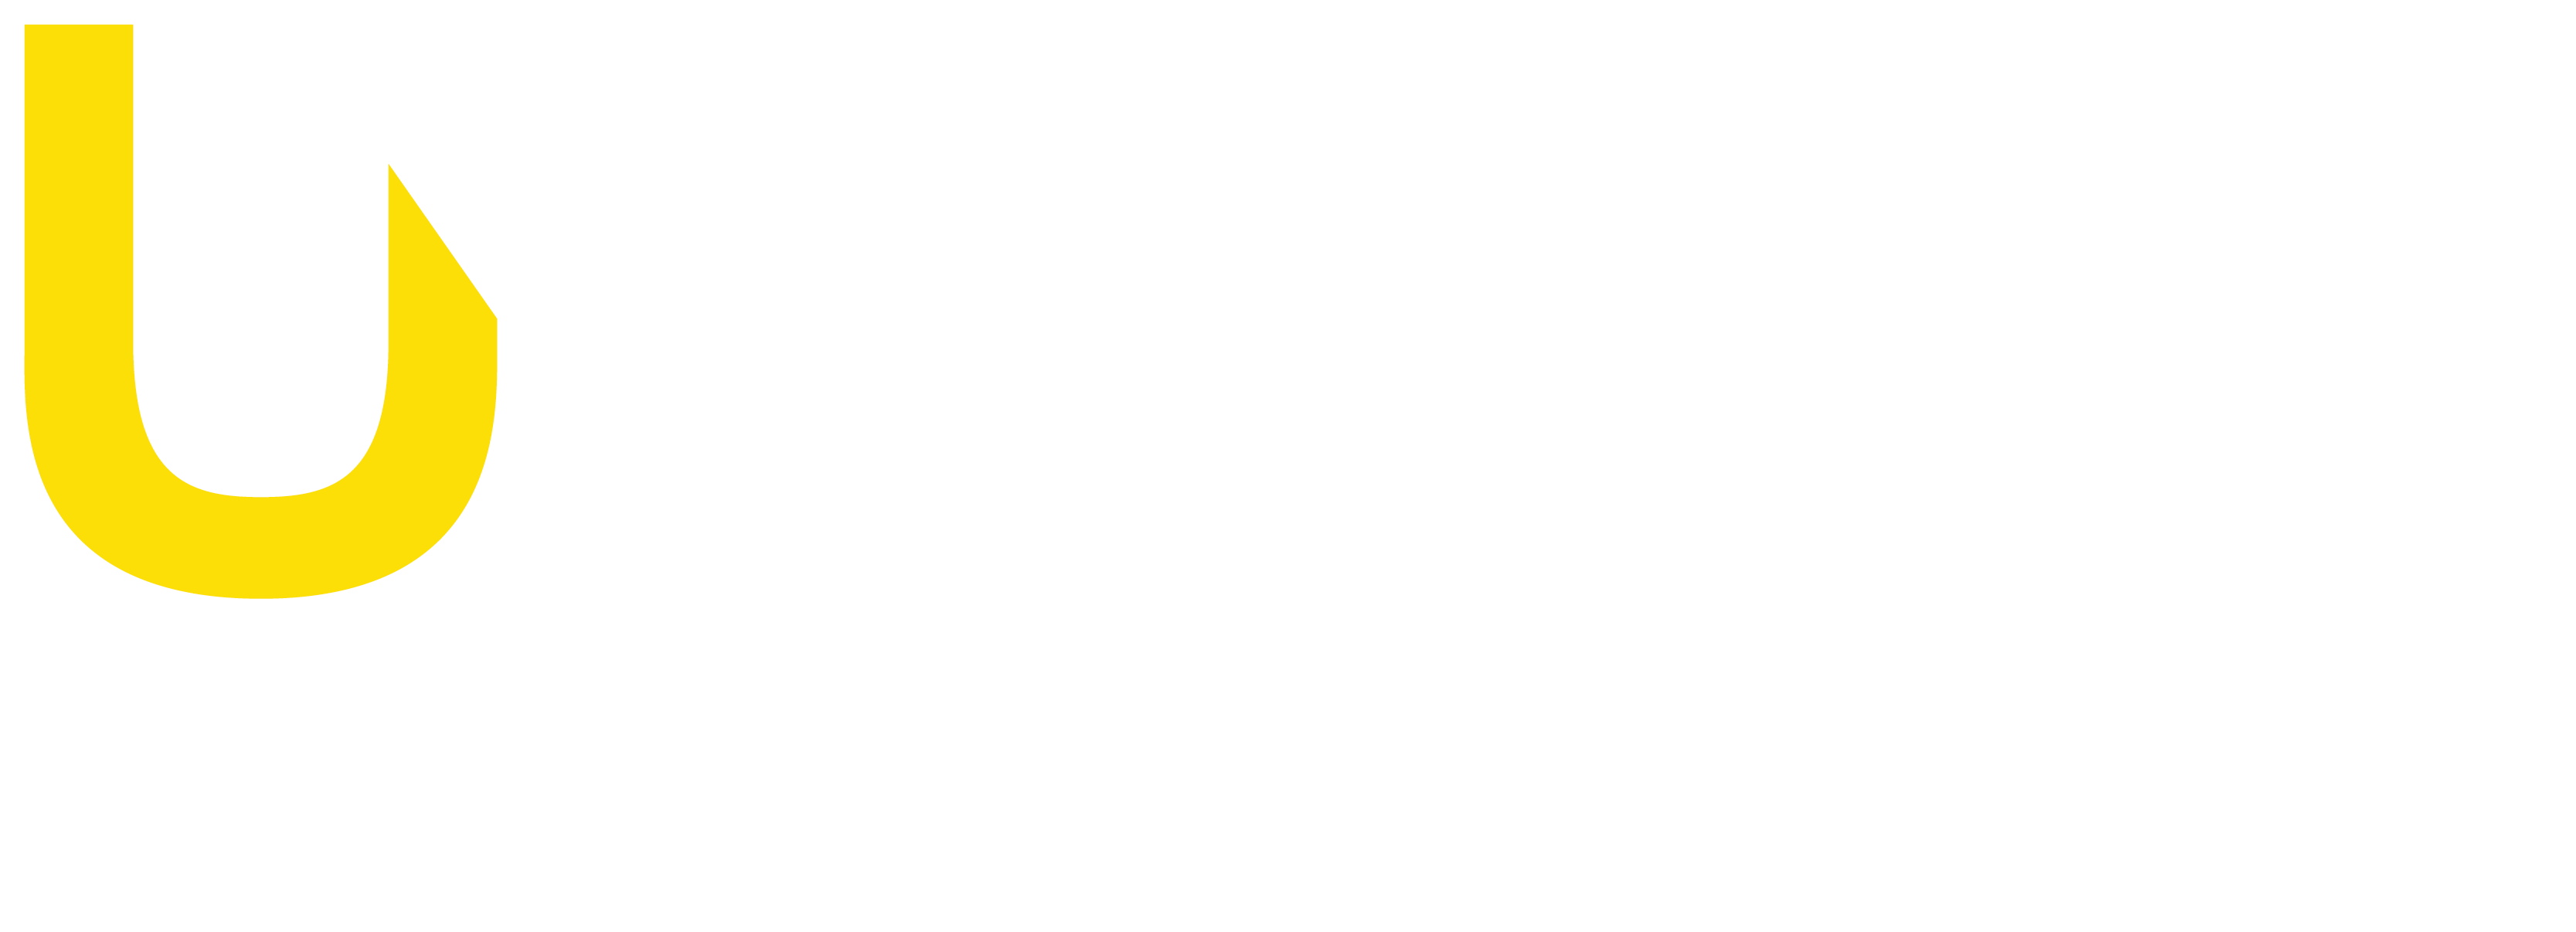 Company logo for 'United Construction & Forestry - Westbrook'.